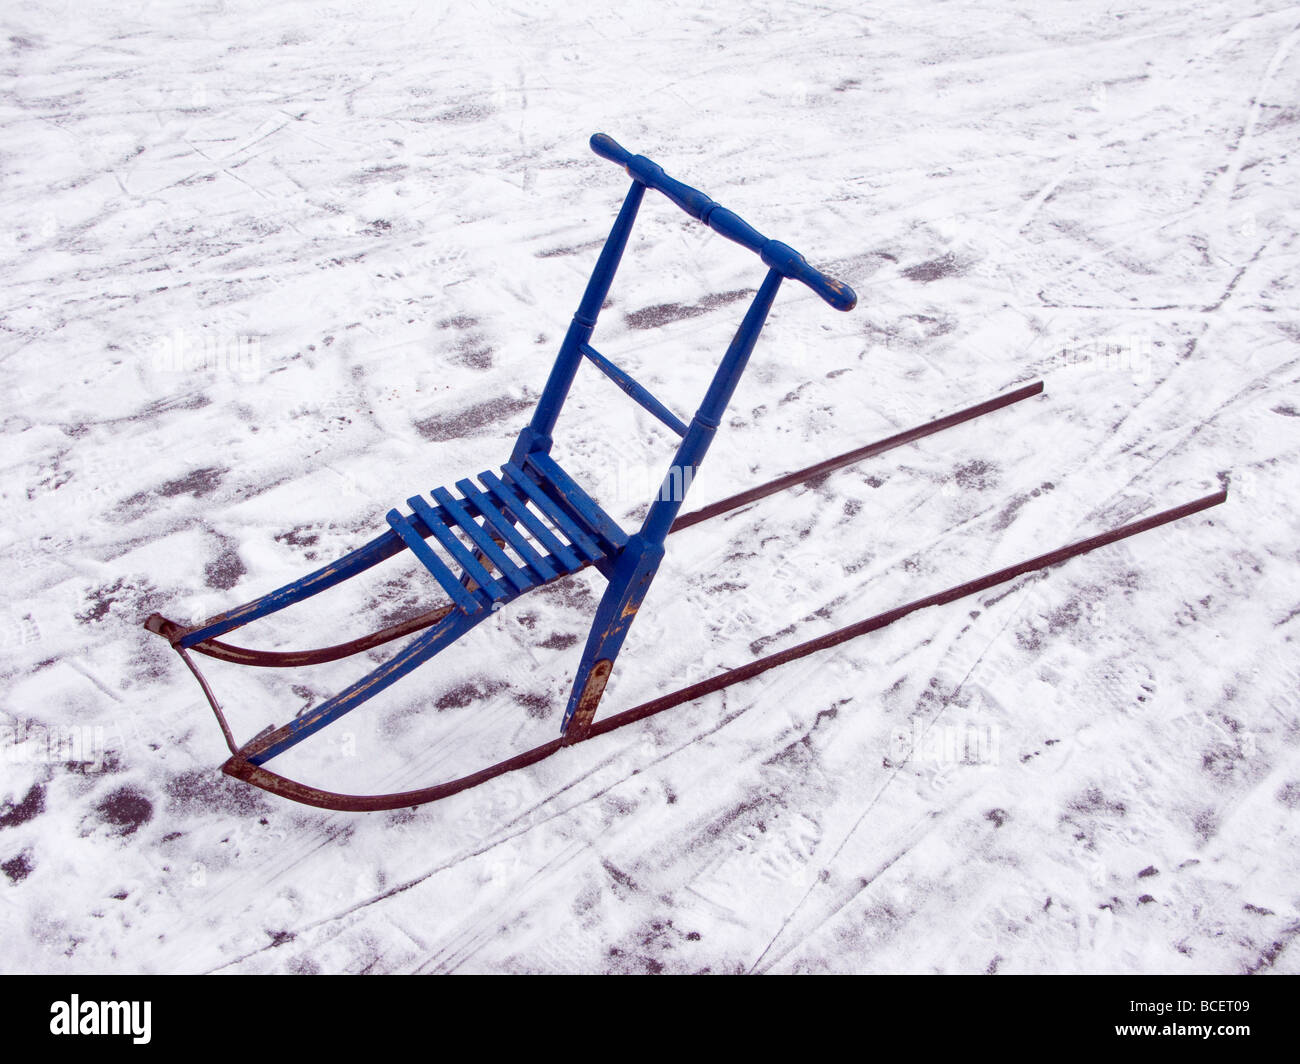 A blue kick-sled on a lake in Sweden Stock Photo